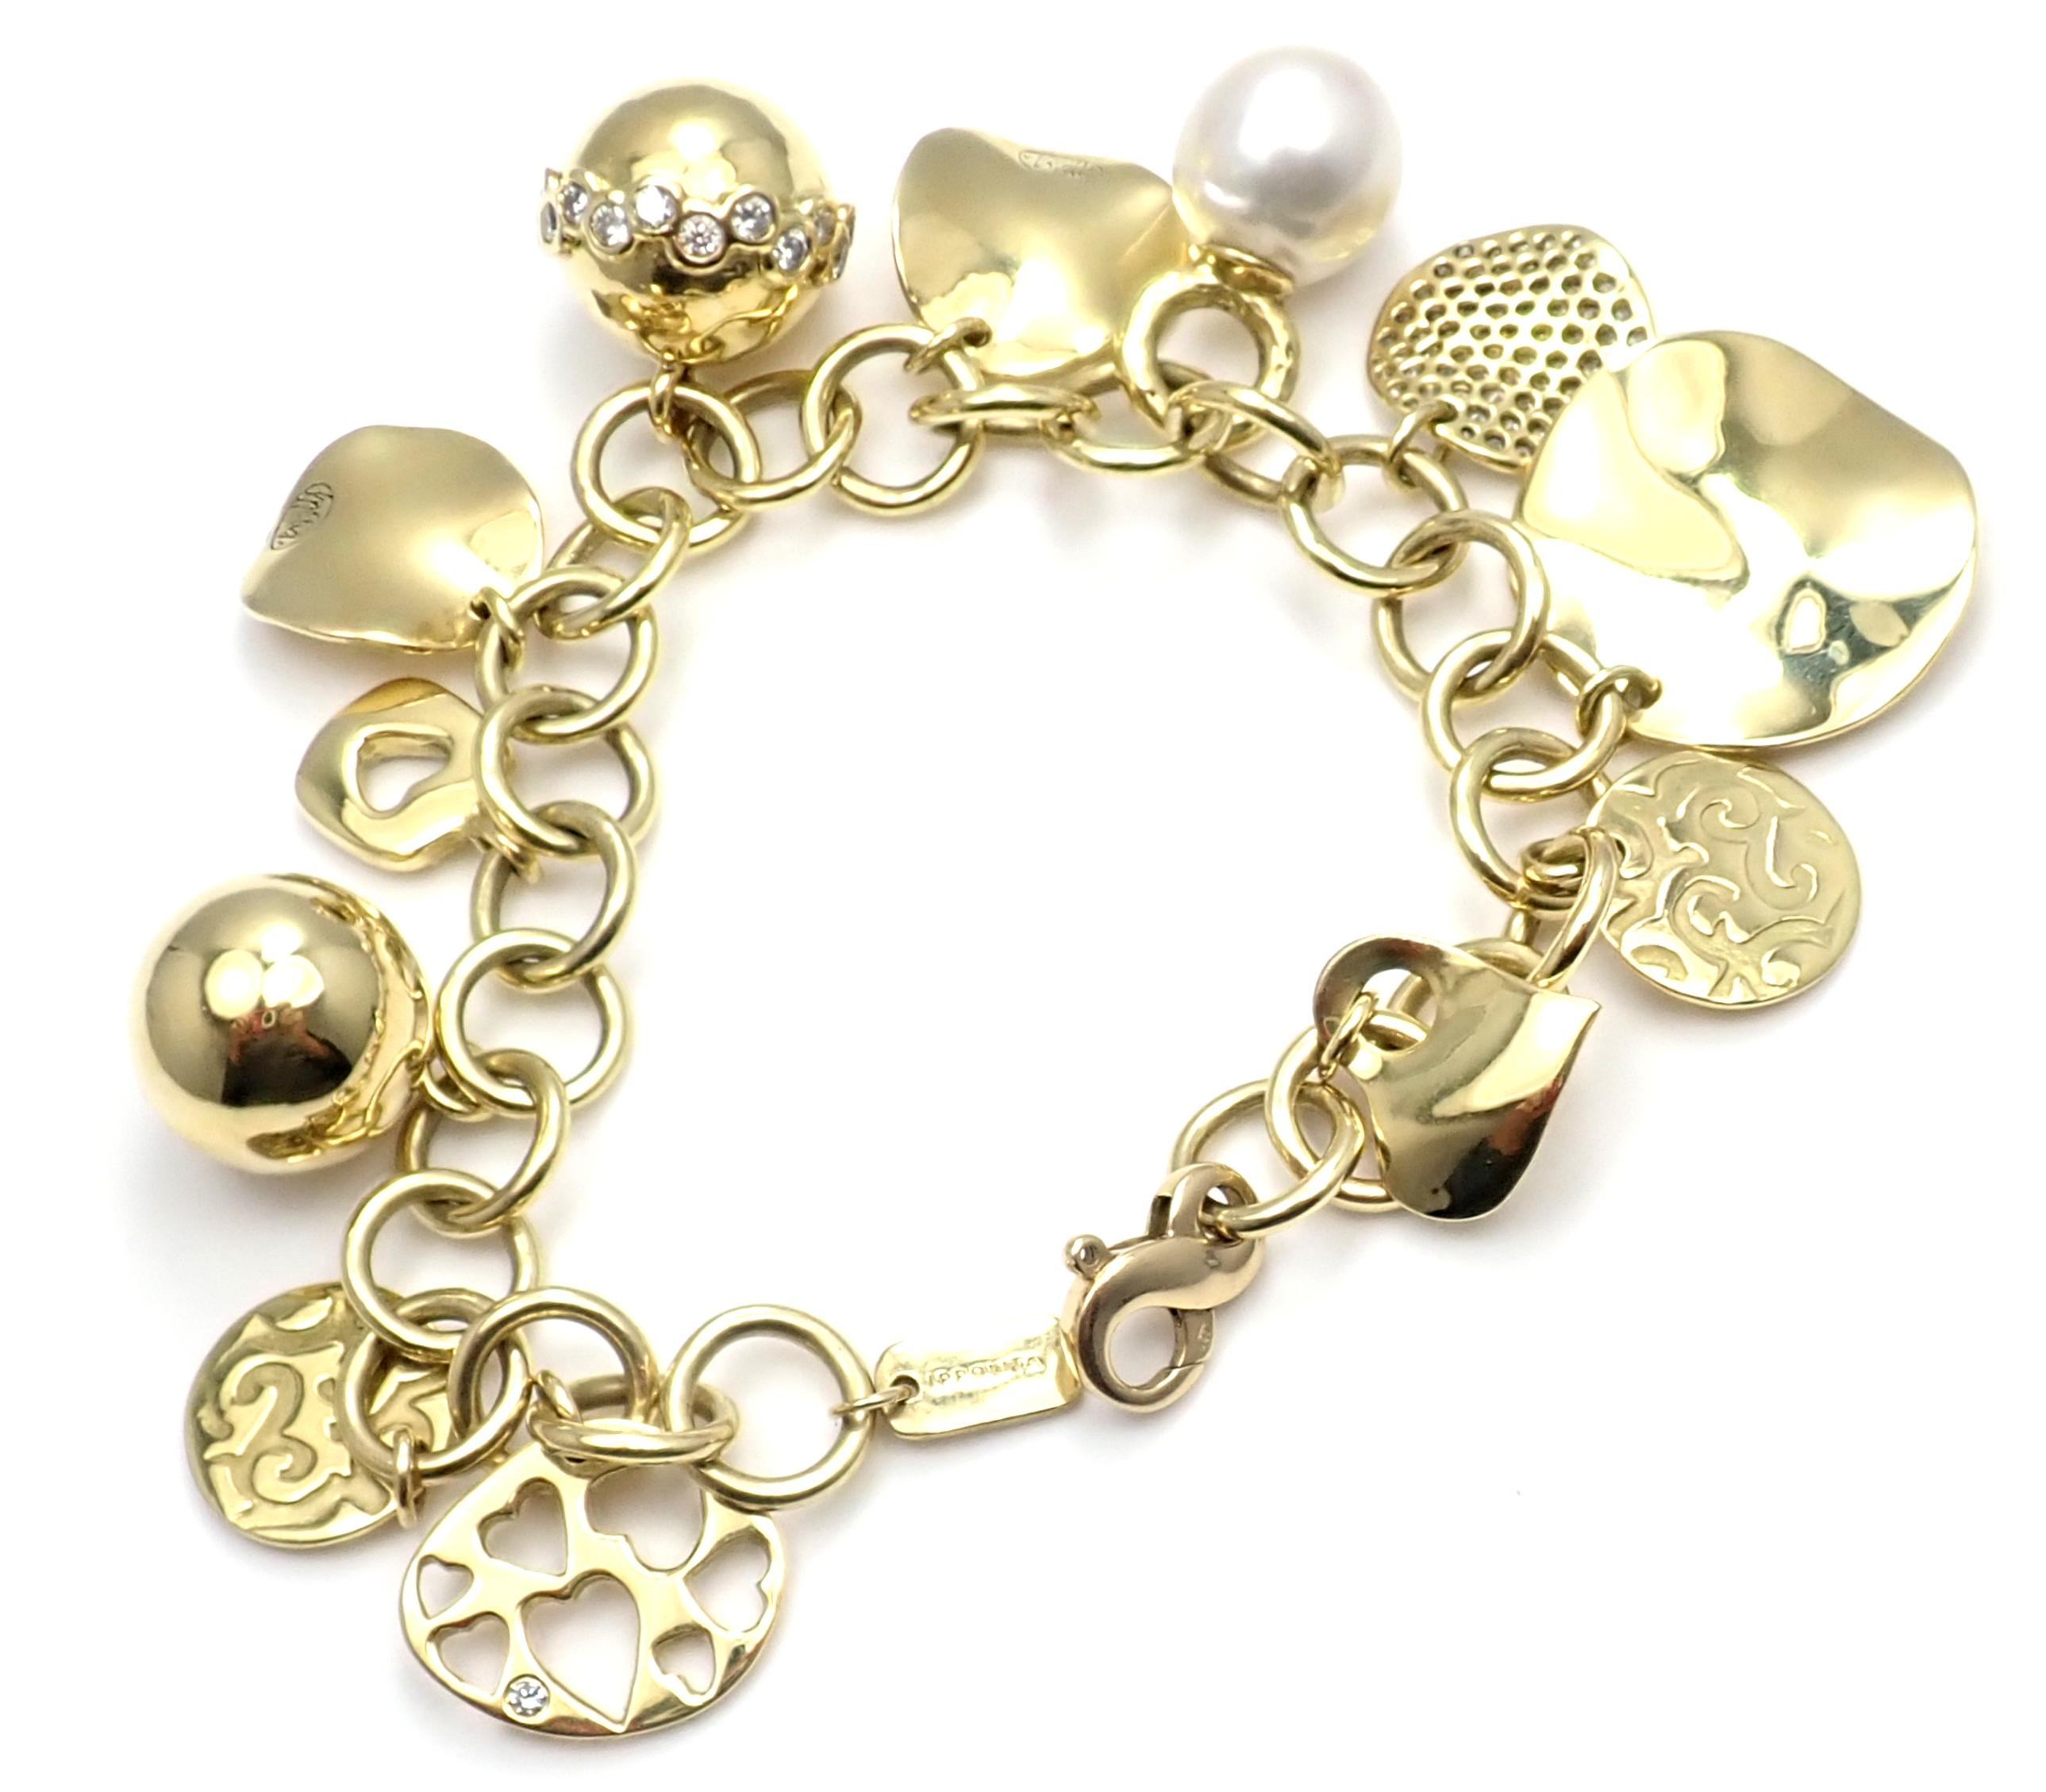 18k Yellow Gold Diamond 12 Charms Link Bracelet by Ippolita. 
With 128 Round brilliant cut diamonds VS1 clarity, G color total weight approx. 2.5ct
Retail price of this bracelet is $25,000
Details: 
Length: 7.5 inches
Width: 10mm chain
Weight: 81.7